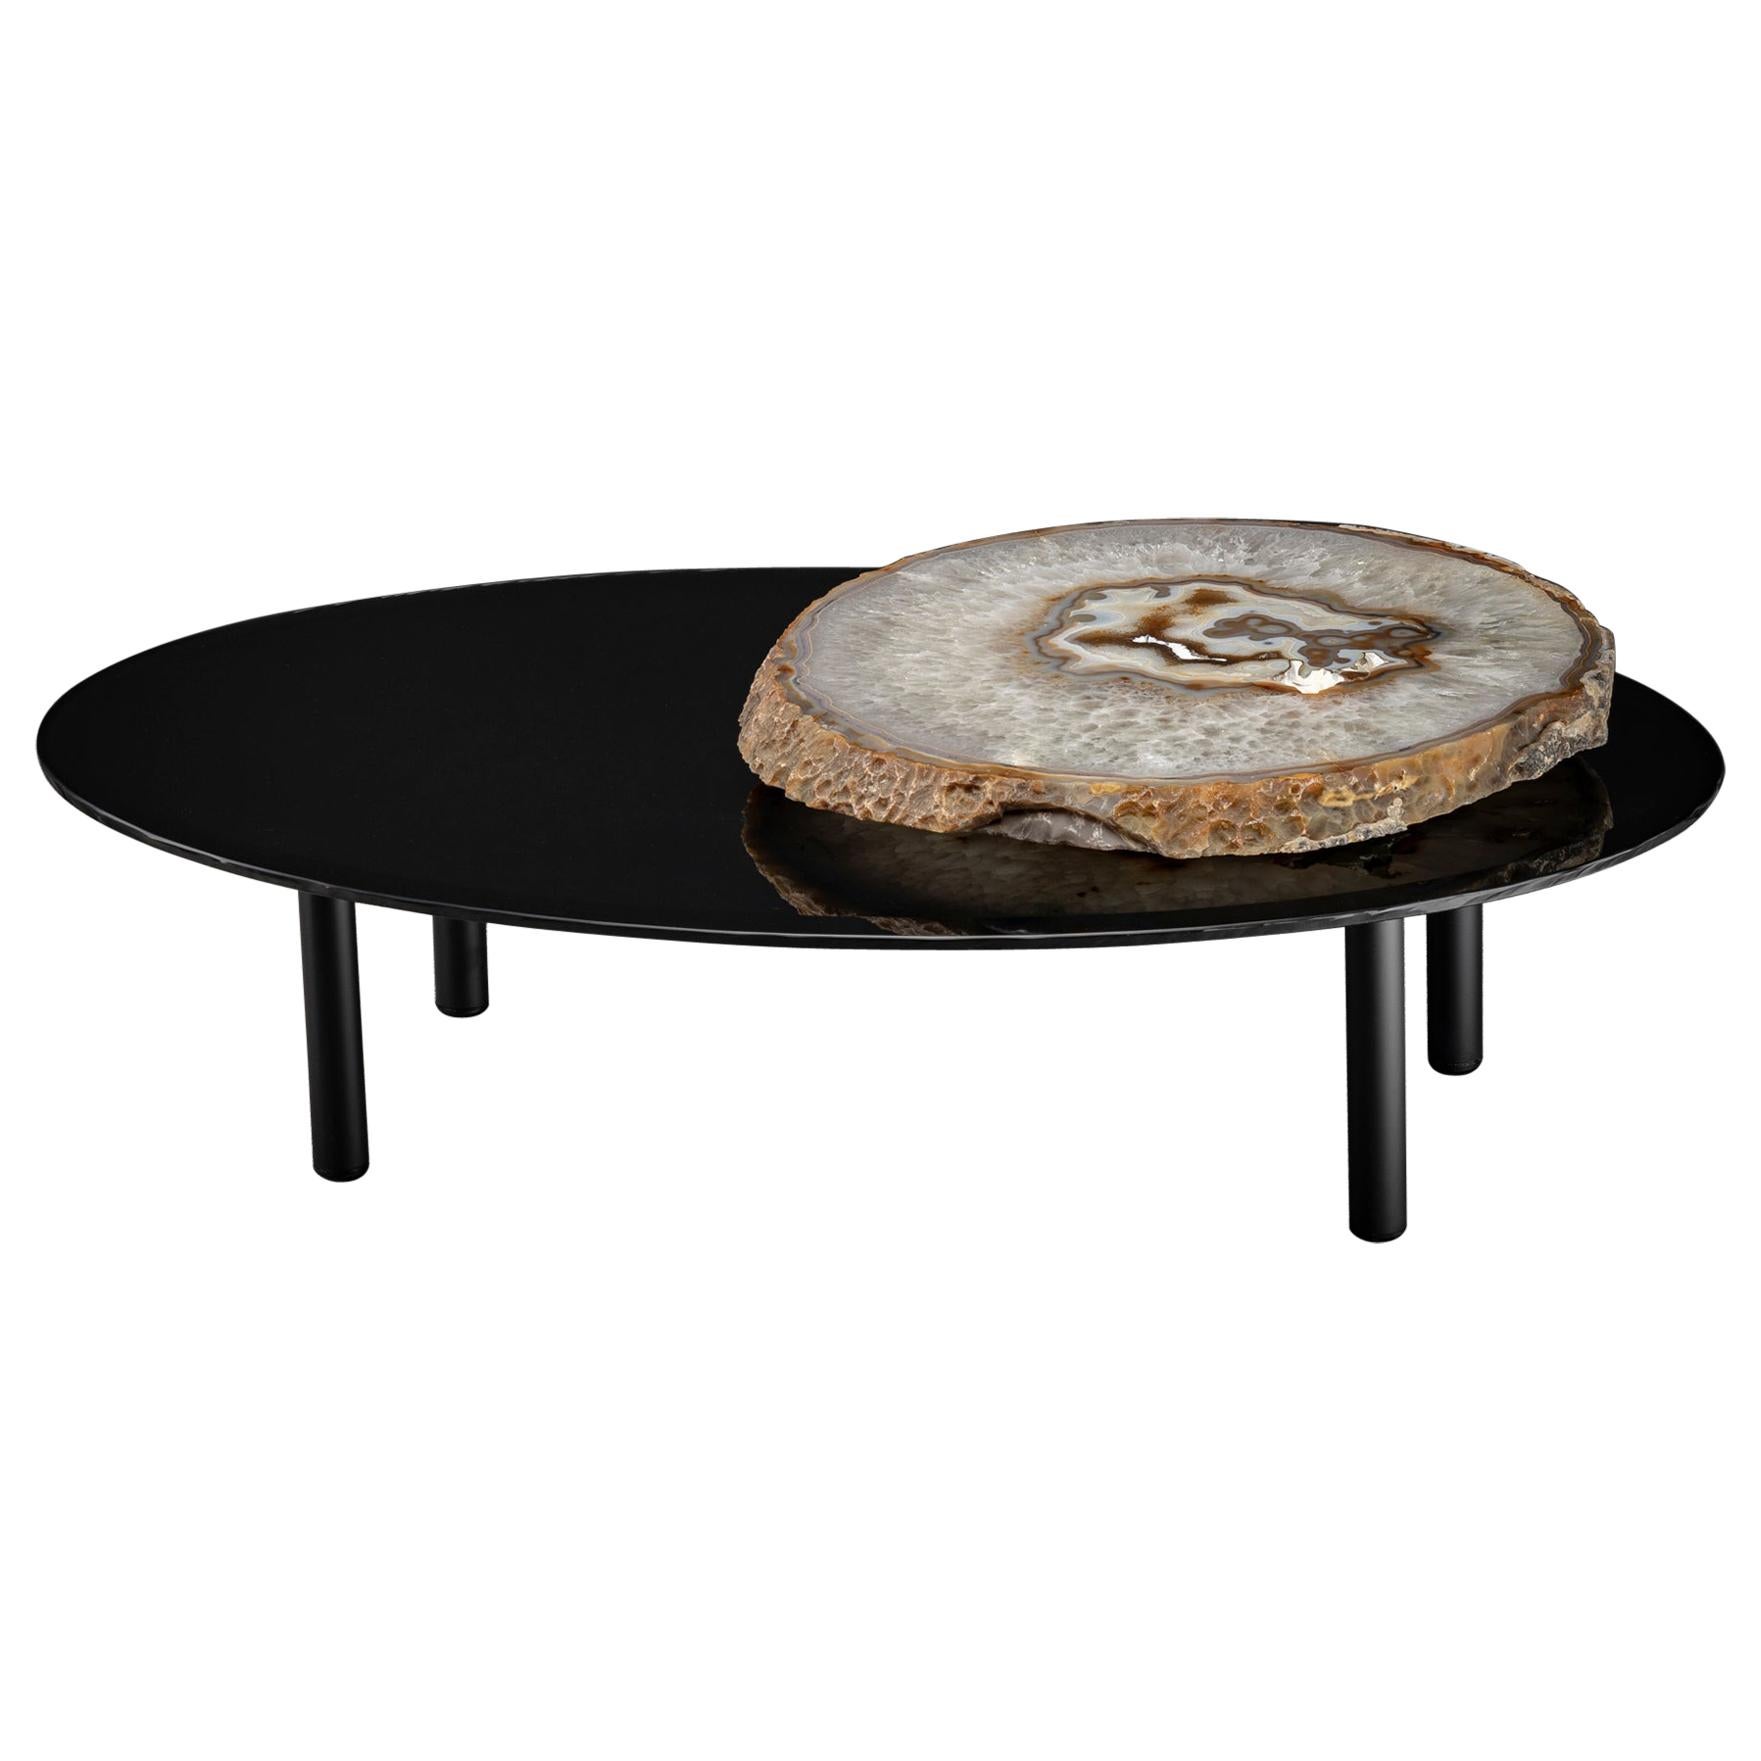 Center Table, with Lazy Susan Rotating Brazilian Agate on Black Tempered Glass